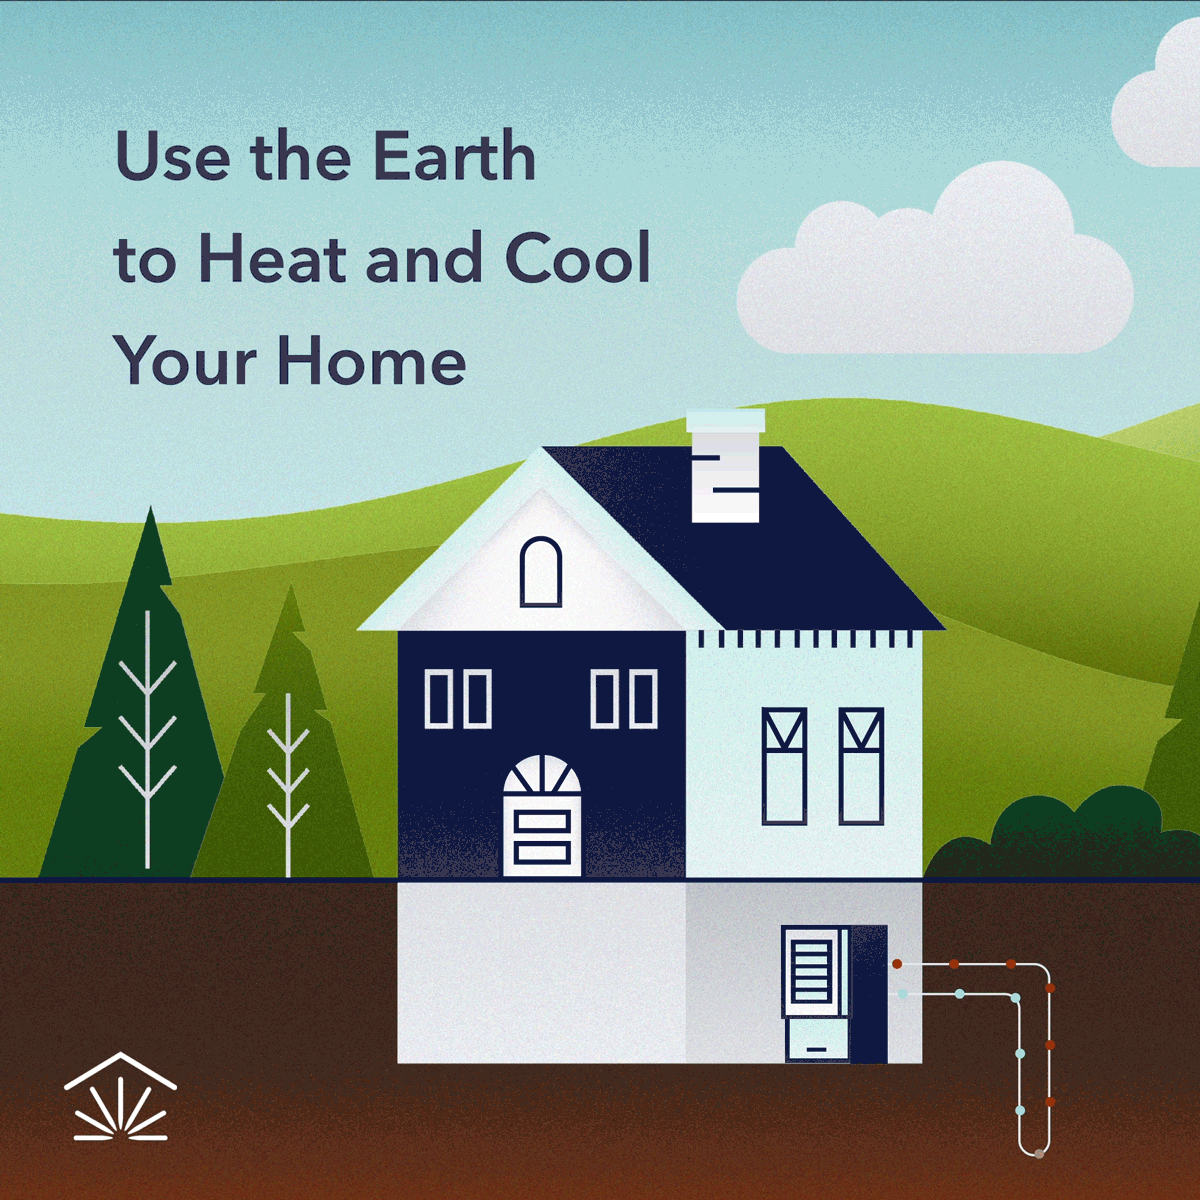 Animated GIF of an illustrated house with a dandelion geothermal unit in the basement. The ground is shaded red, and dots are running through the geothermal ground loop turning from blue to red as they pick up heat. Headline text says 'Use the Earth to Heat and Cool your Home'